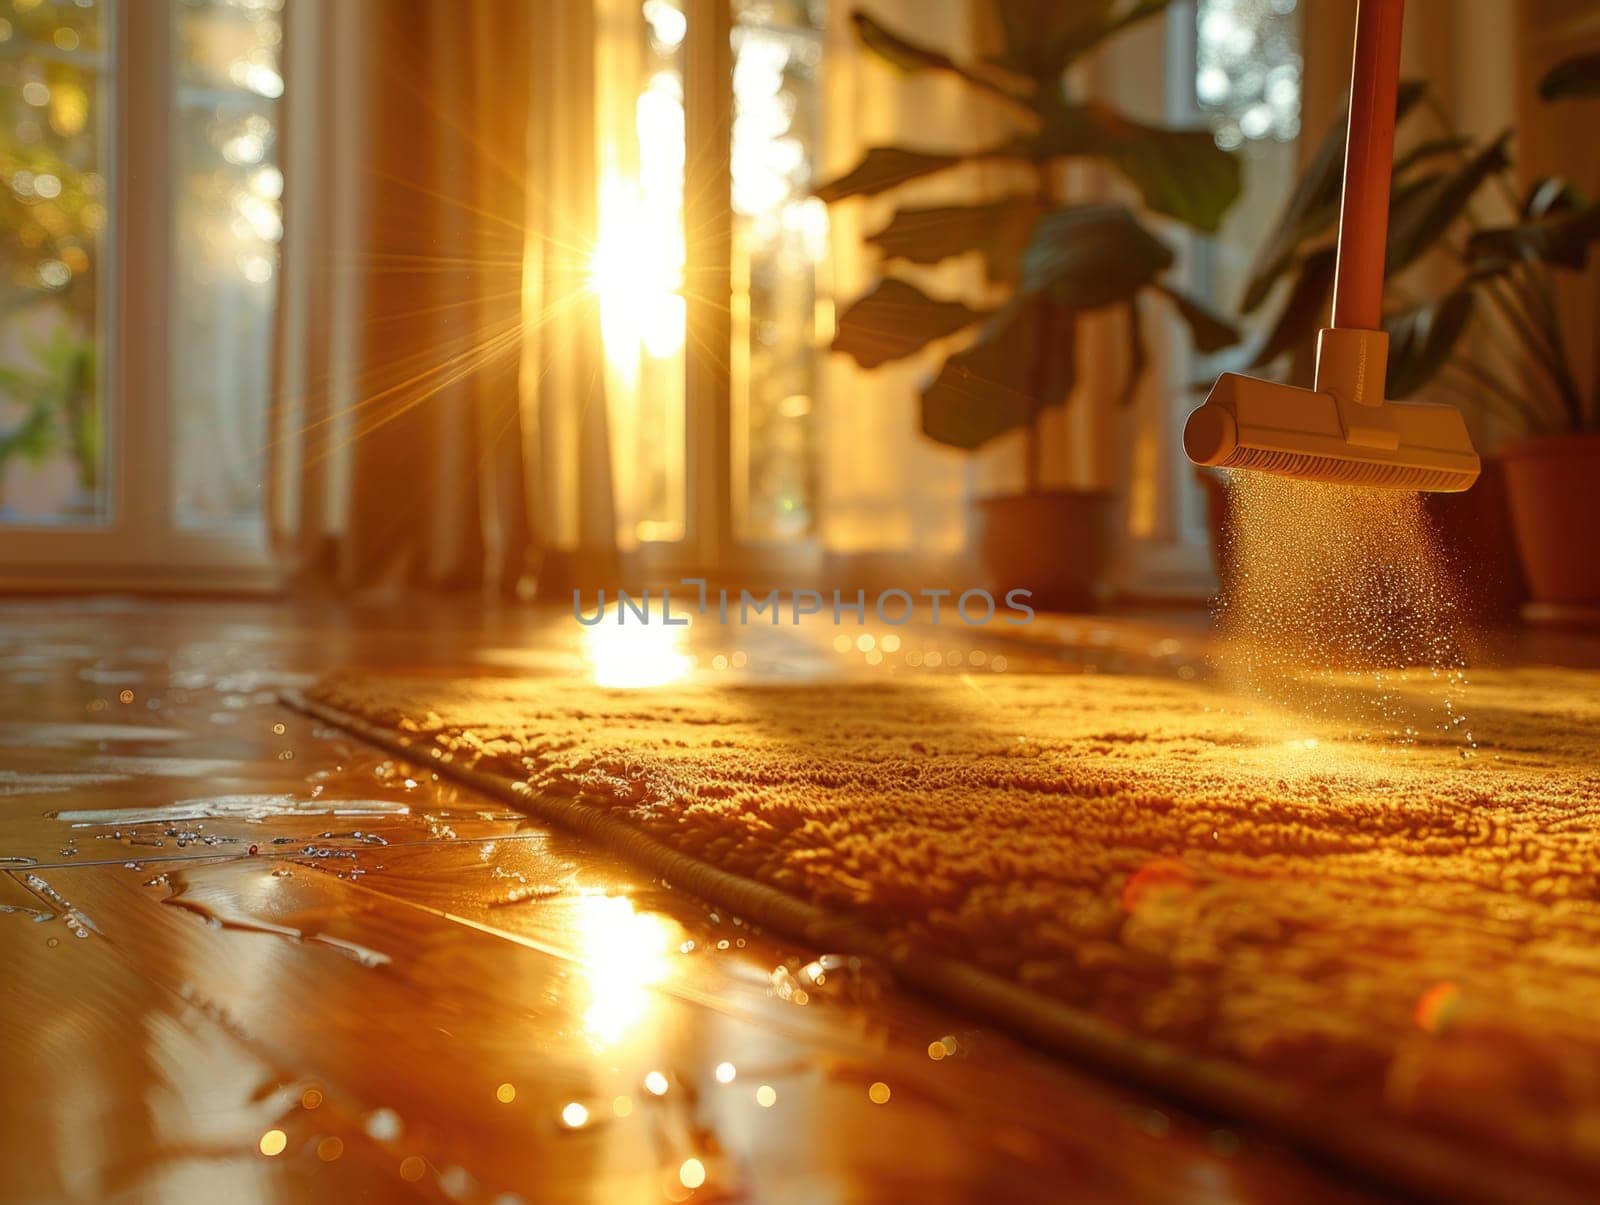 Detailed view of a floor with a broom on it, showcasing cleanliness and maintenance.